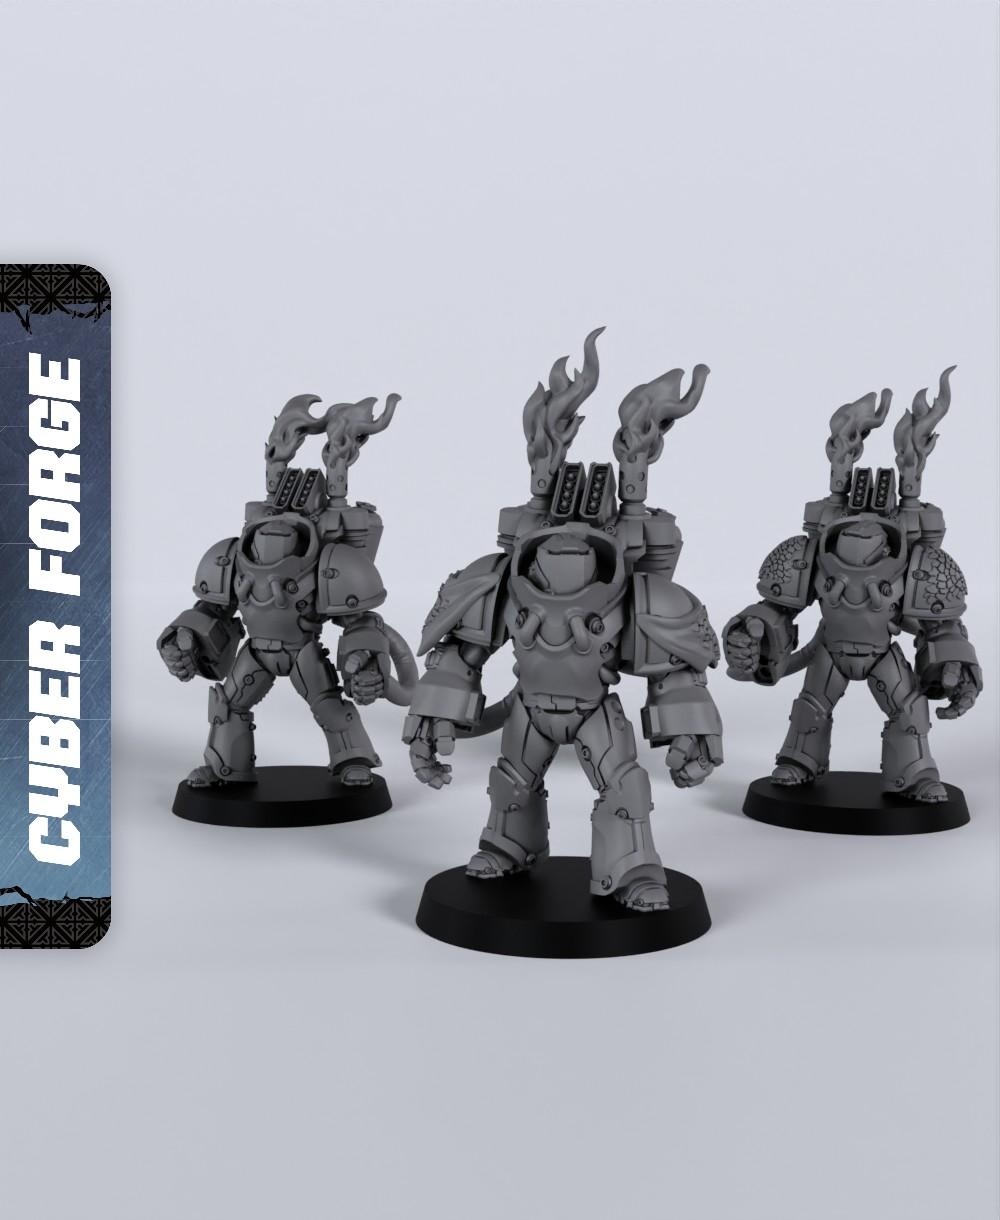 Firebats - With Free Cyberpunk Warhammer - 40k Sci-Fi Gift Ideas for RPG and Wargamers 3d model